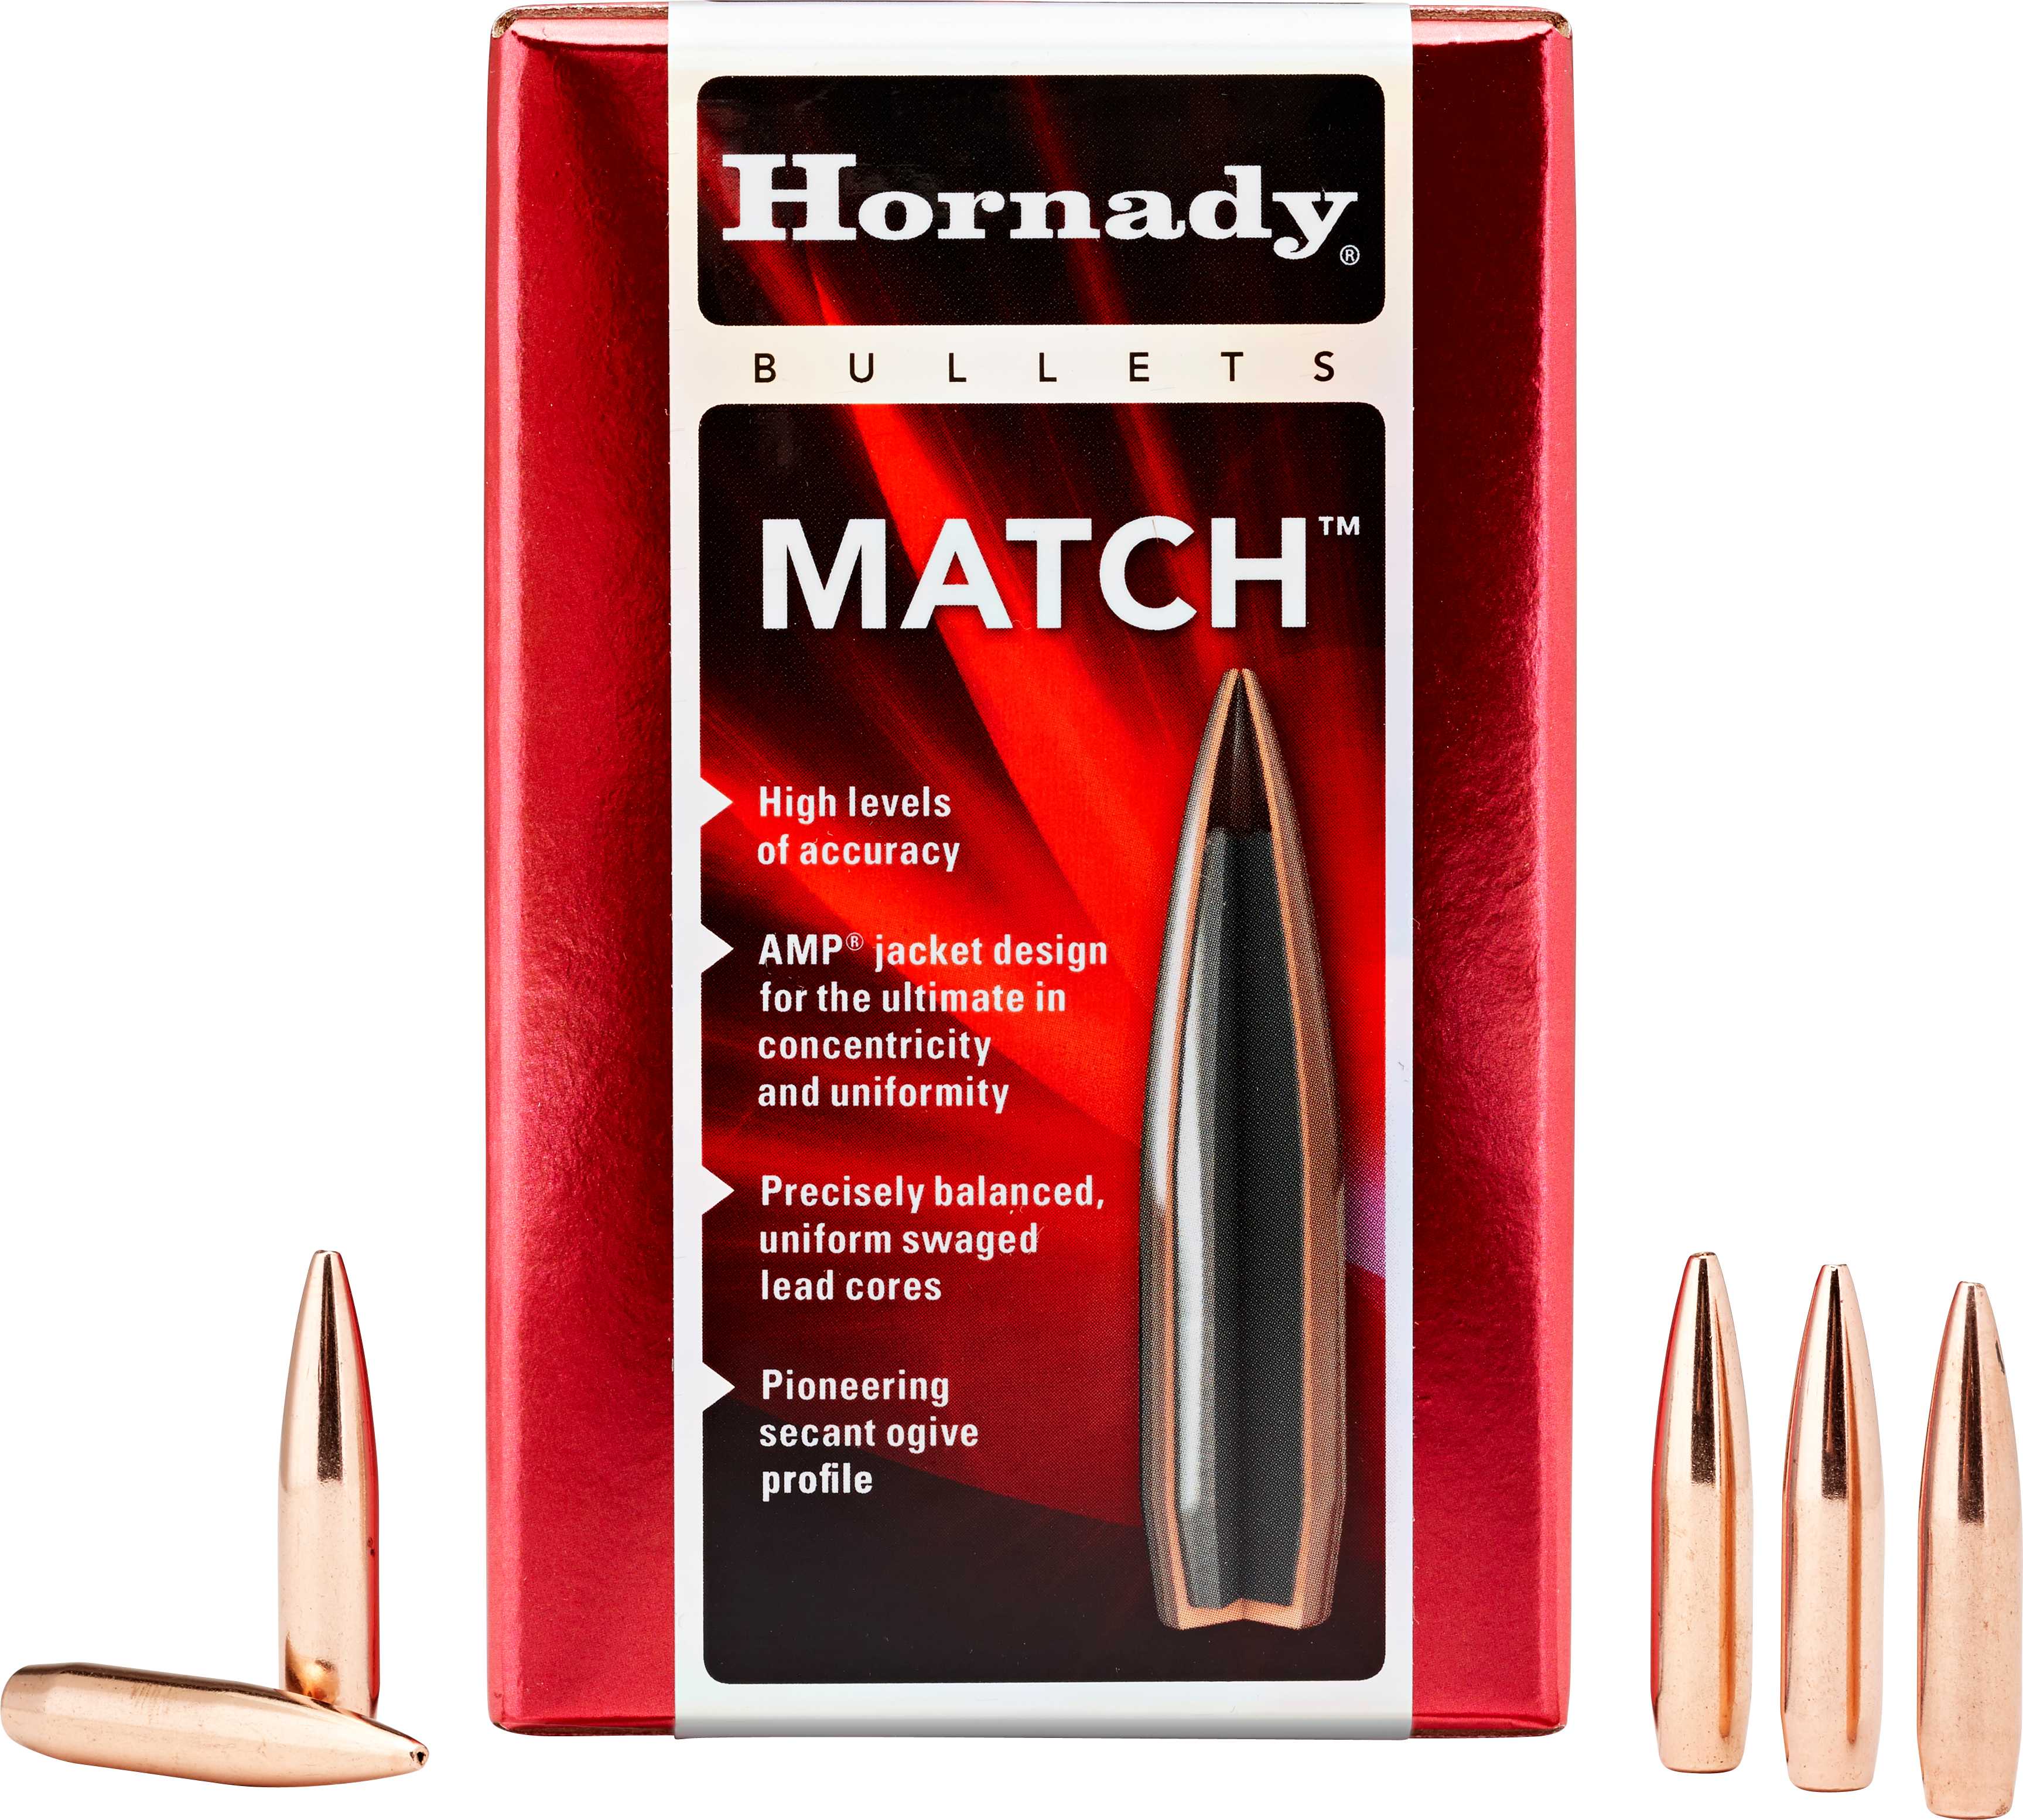 Hornady 22 Caliber Bullets (.224 Diameter) 55 Grains, Hollow Point Boat Tail with Cannelure, Per 6000 Md: 226